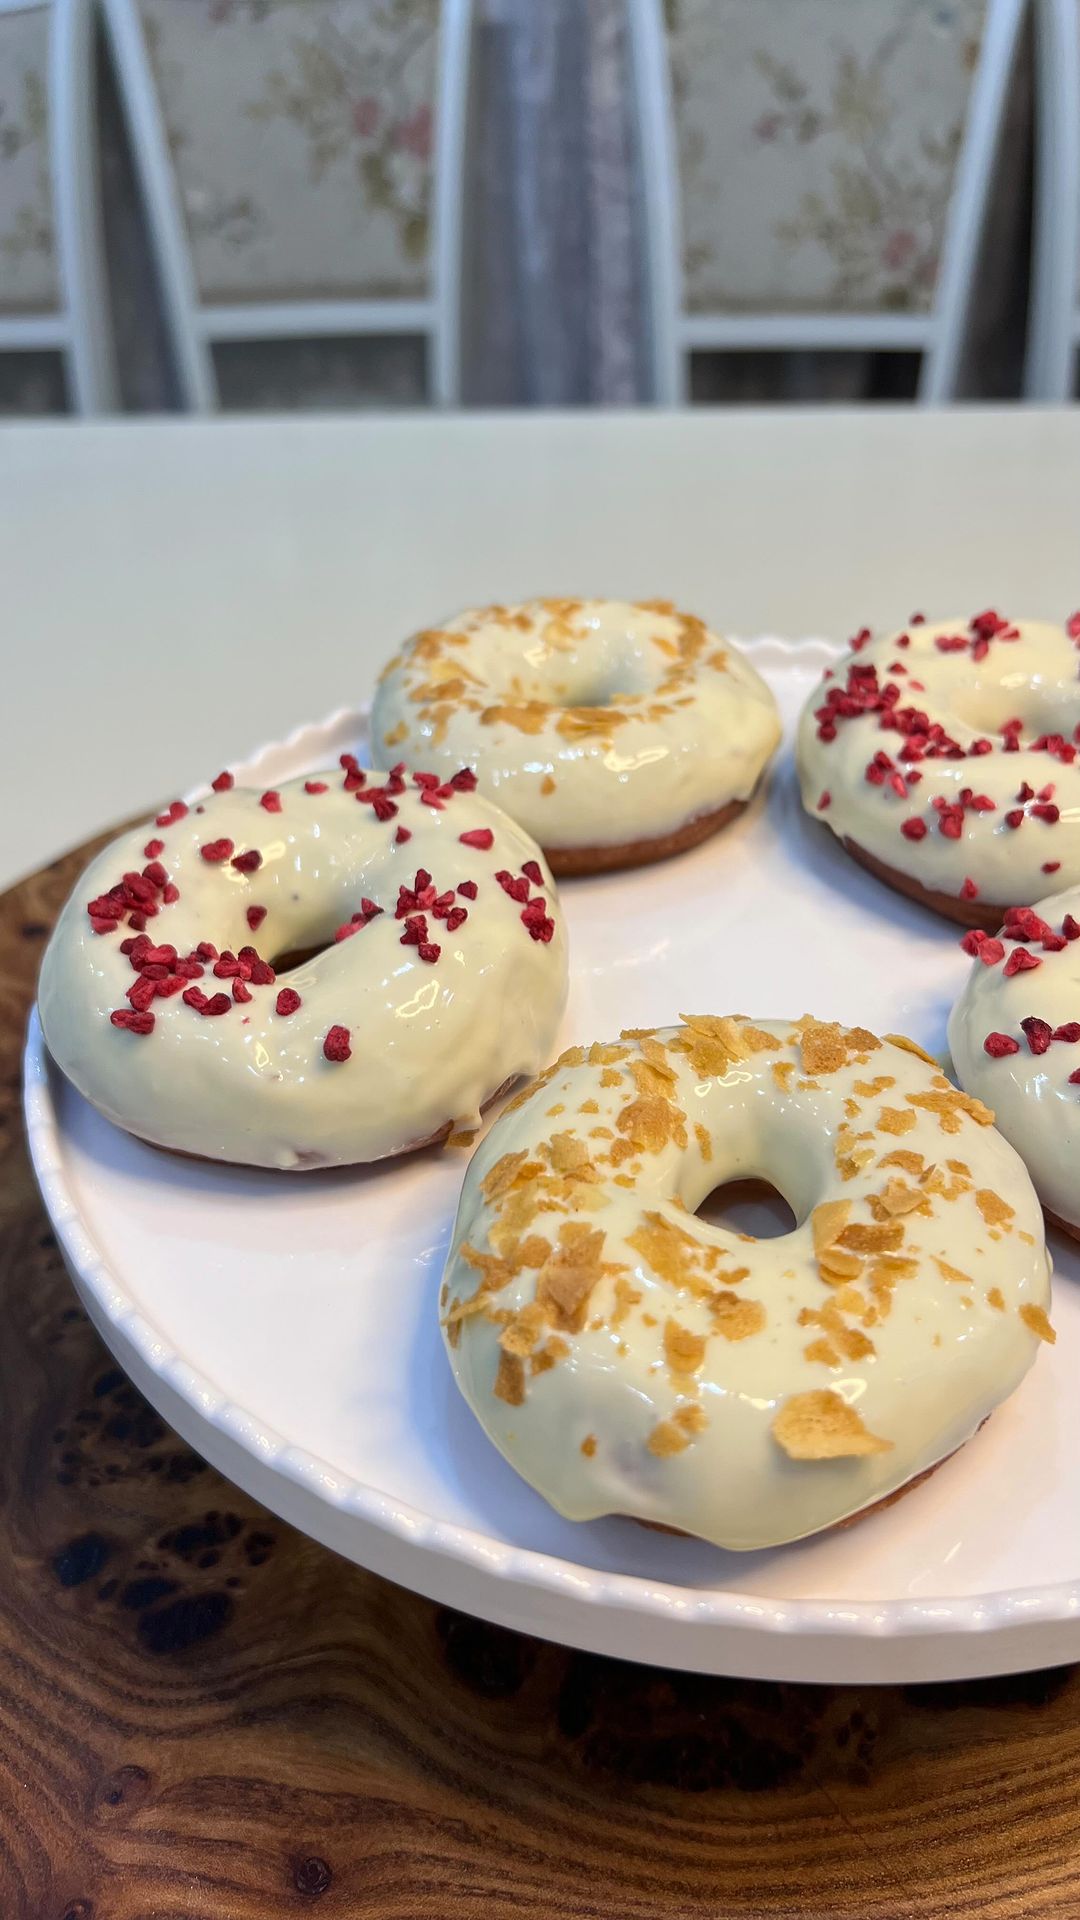 Delicious Homemade Donuts